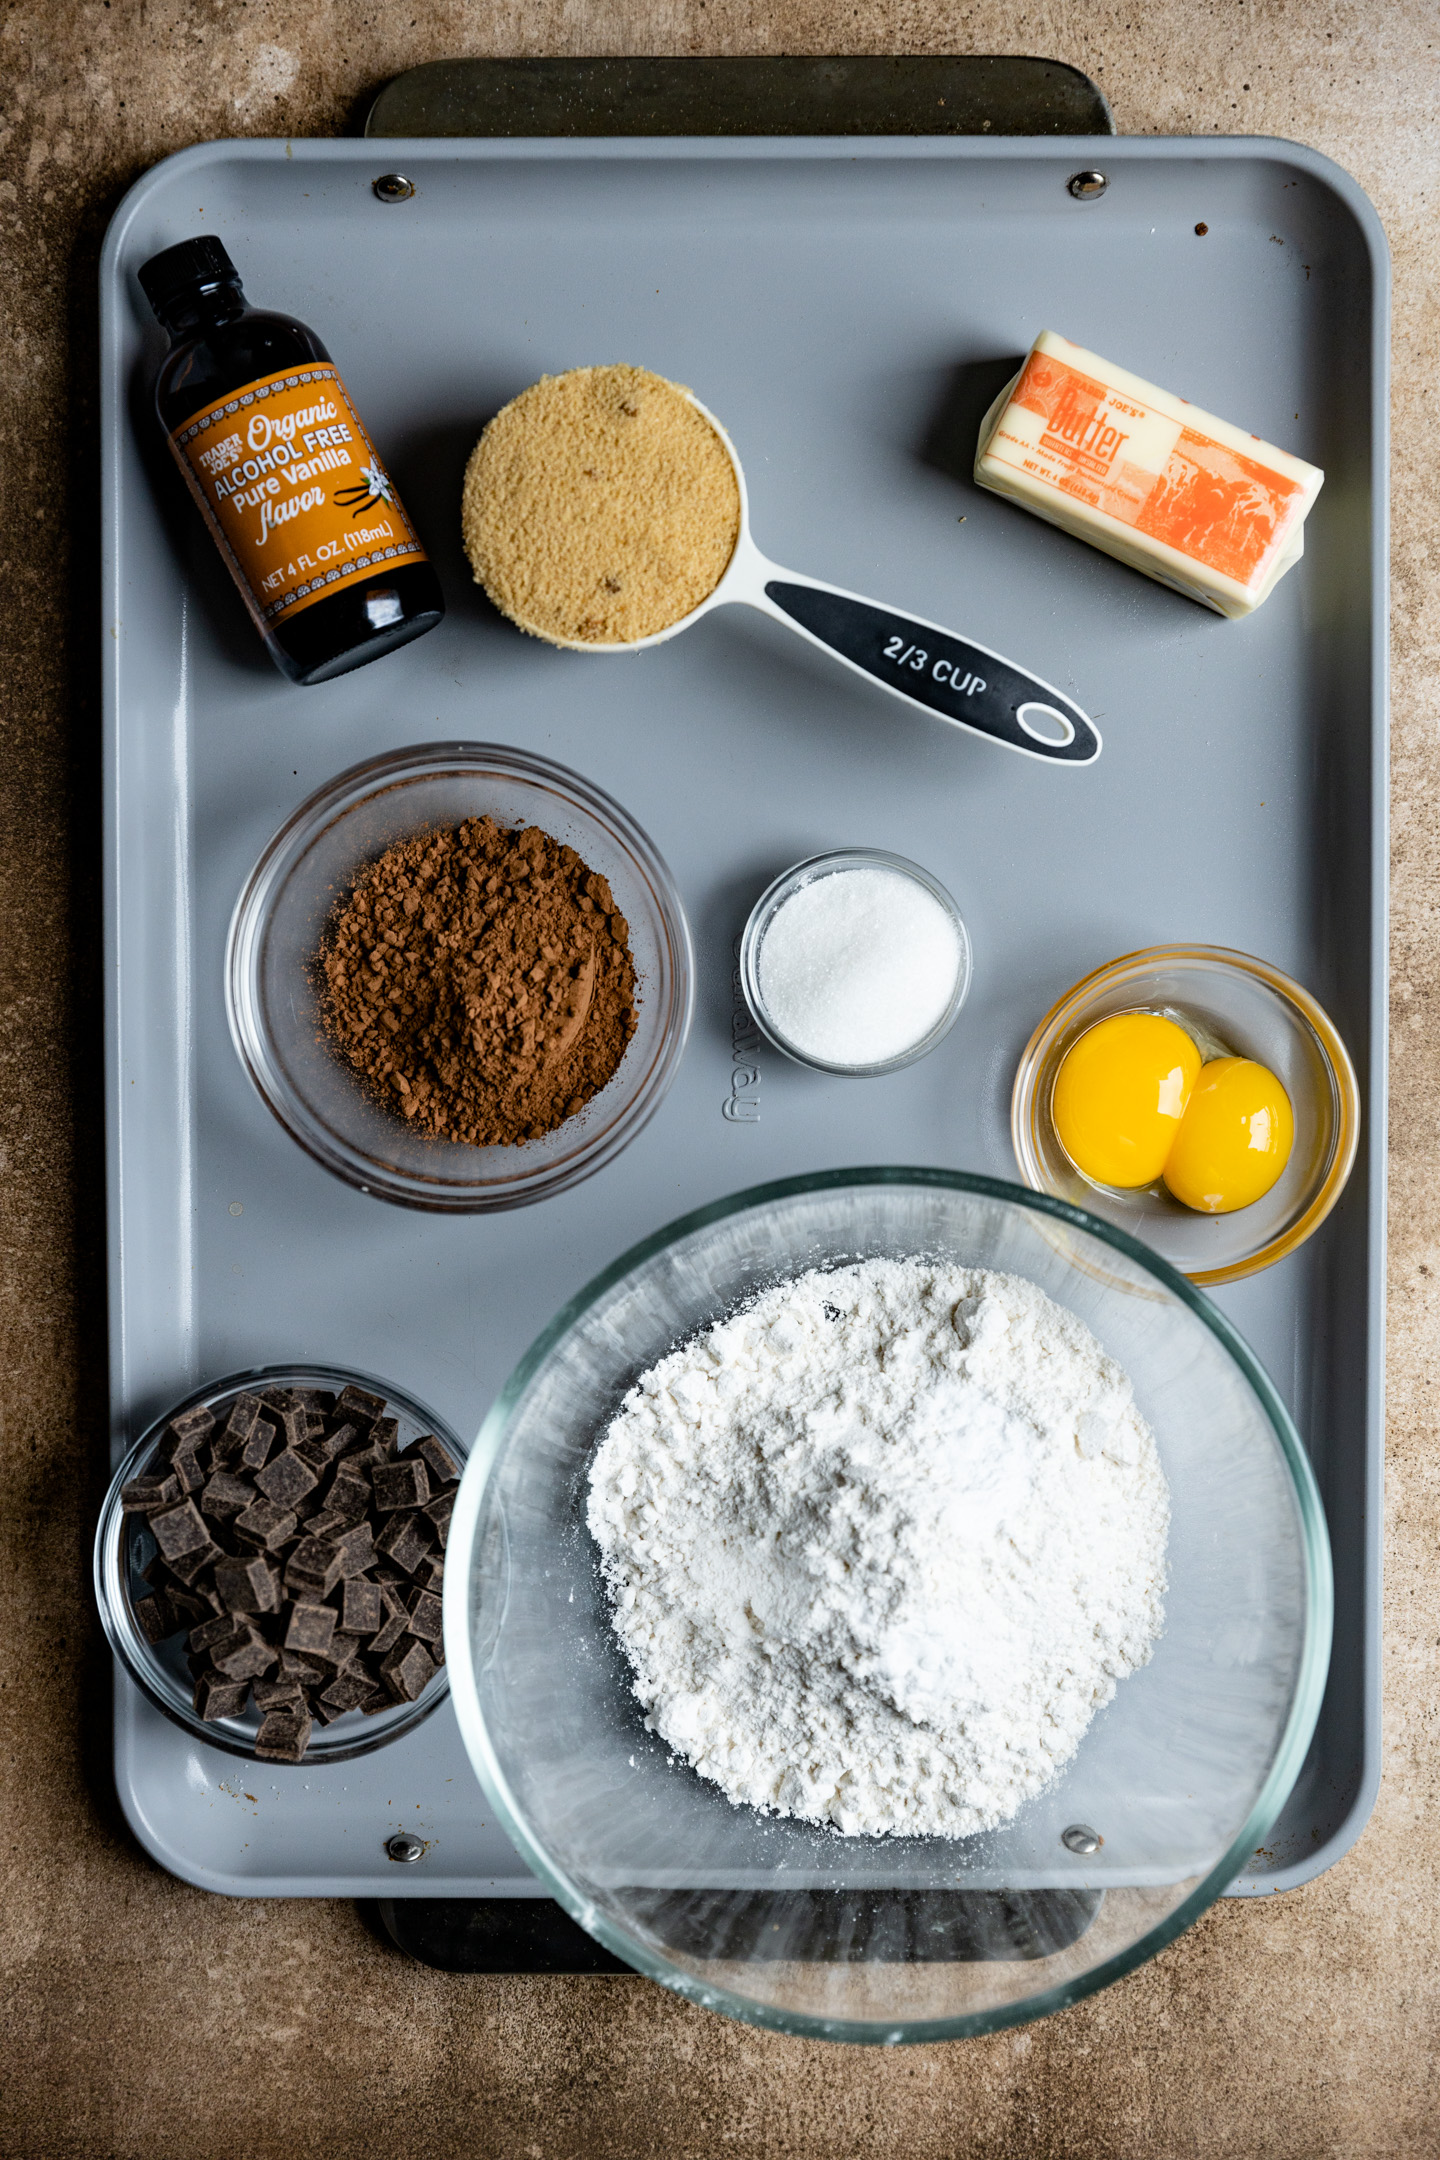 Ingredients for double chocolate chip cookies.